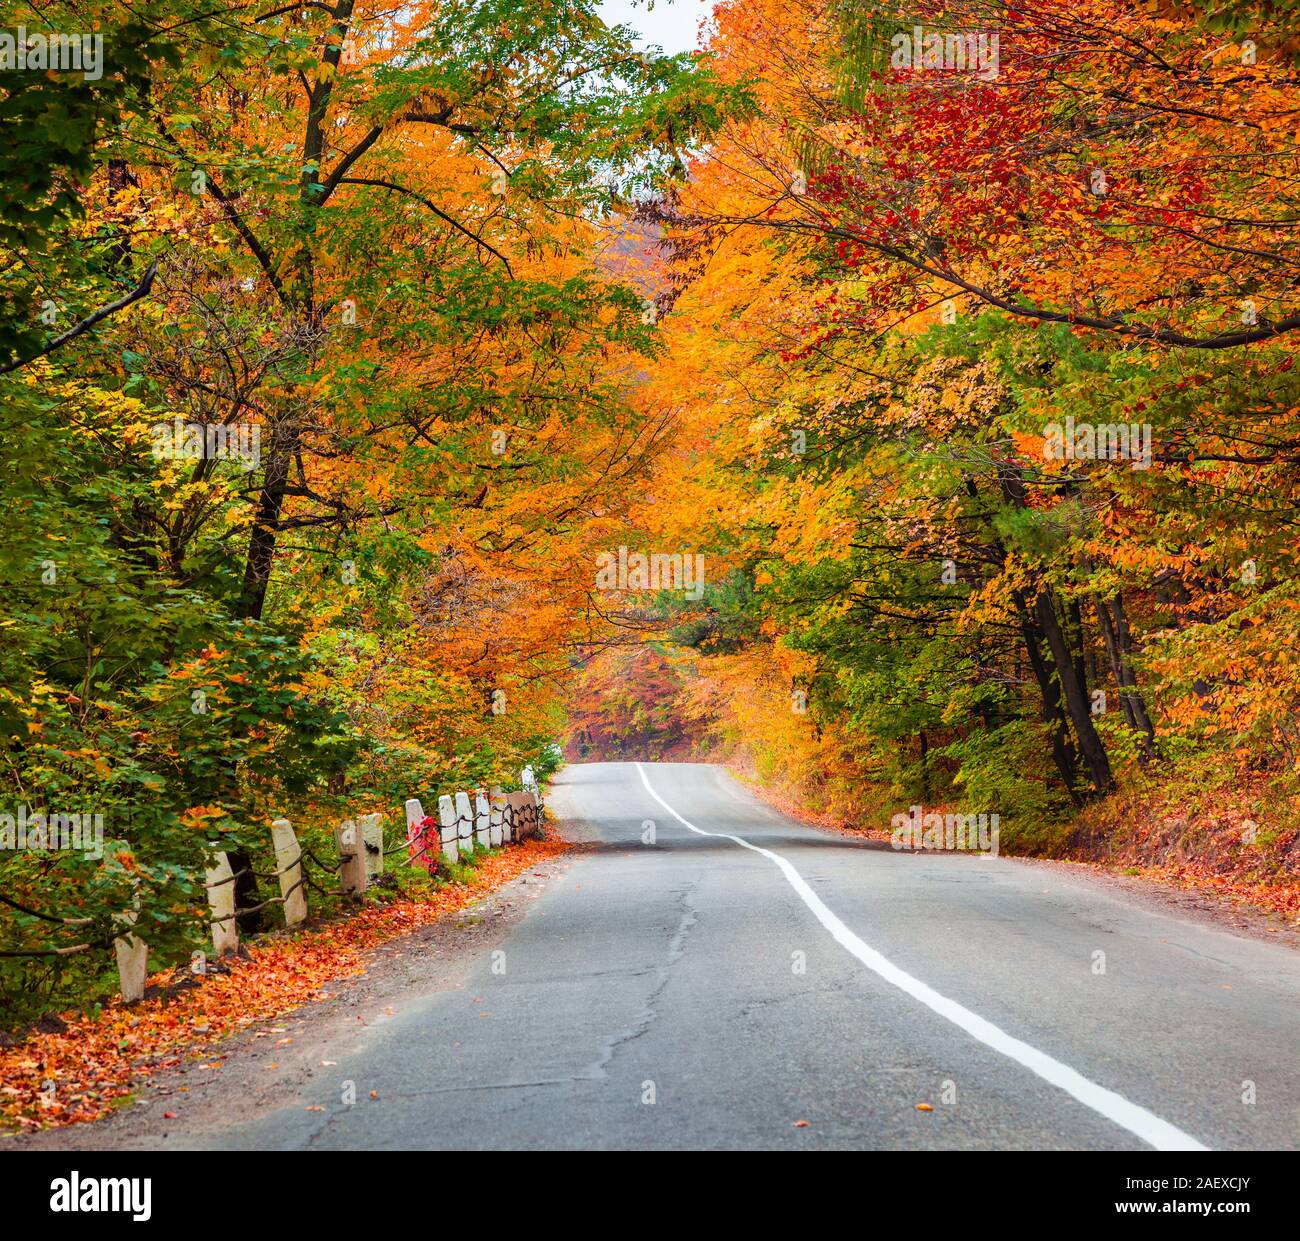 Asphalt road among the autumn forest road Stock Photo